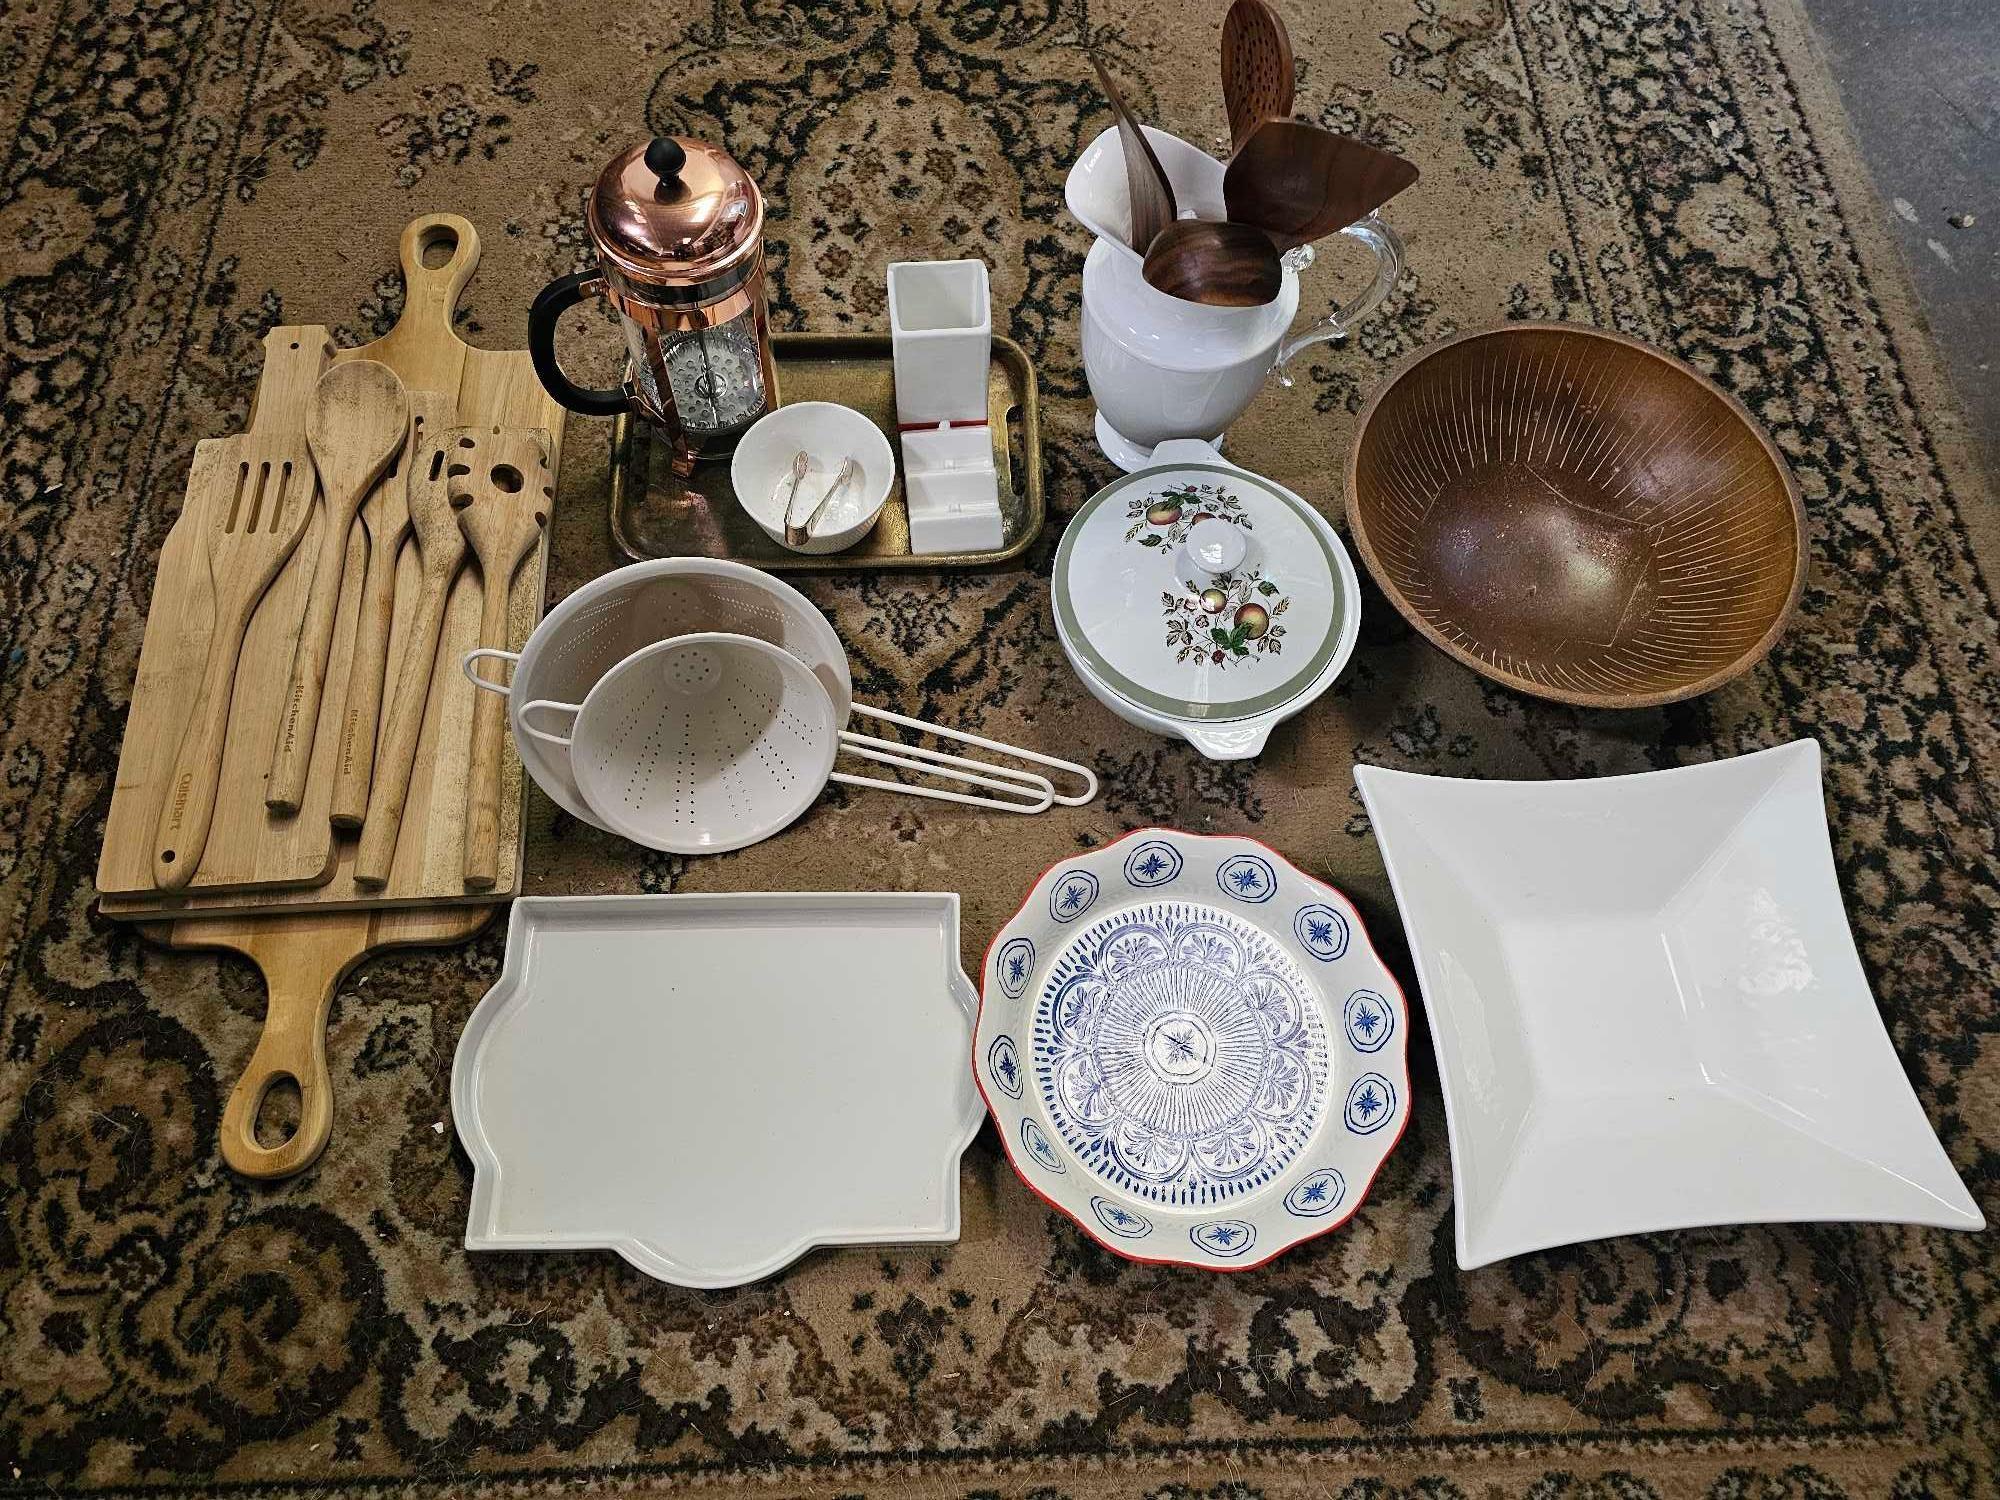 A Selection Lion Of Various Kitchen Ware